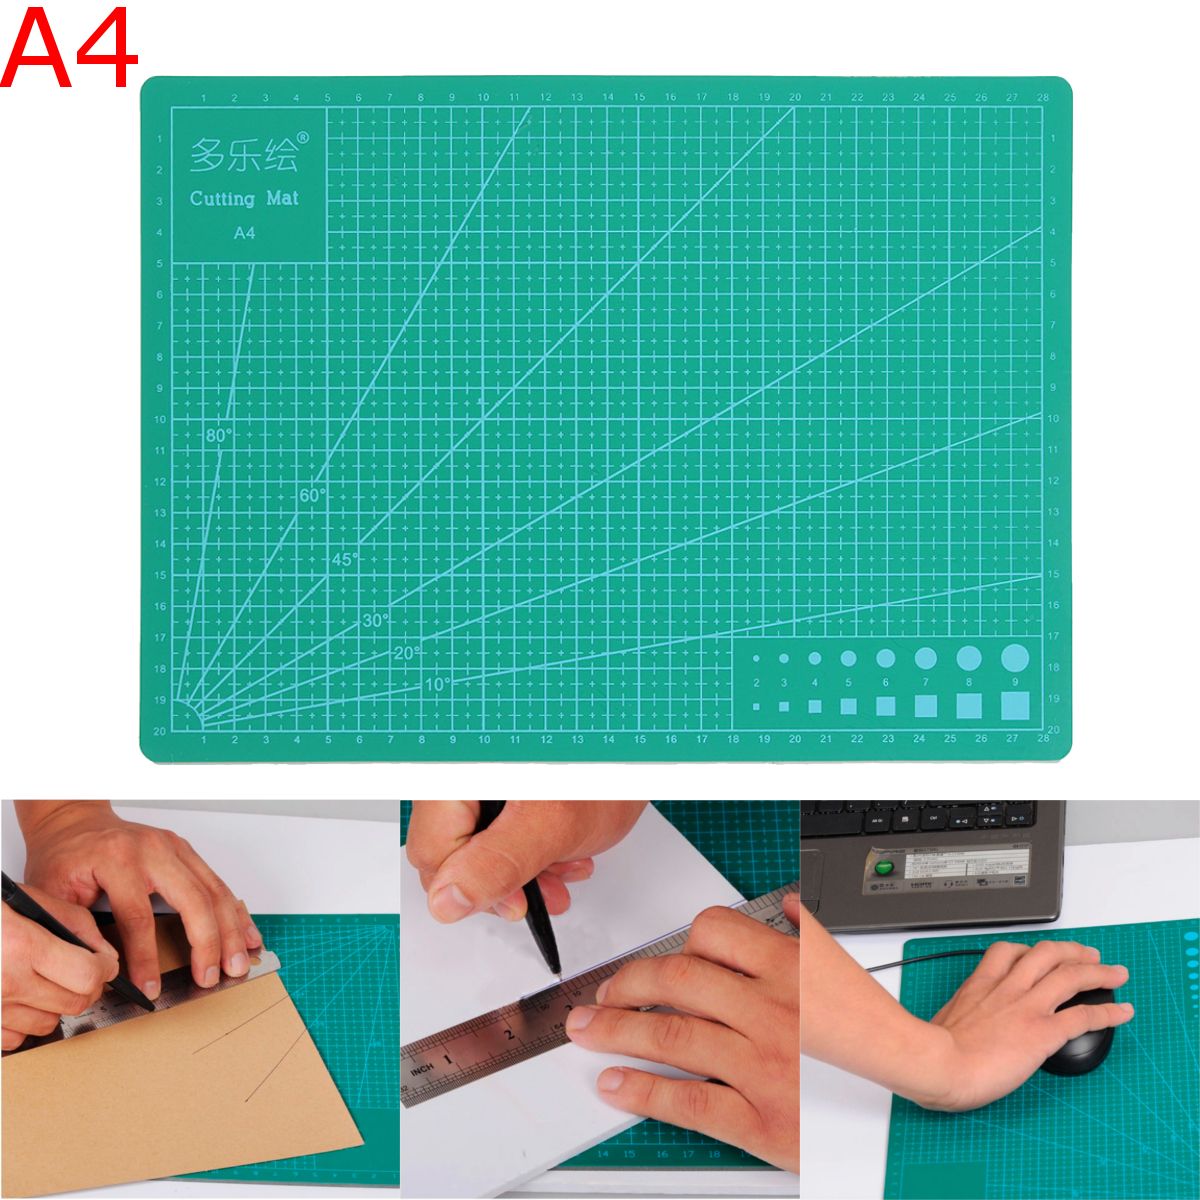 A4-Cutting-Craft-Mat-Double-sided-Non-Slip-Printed-Grid-Quality-Cutting-Soldering-Practice-Board-22c-1288890